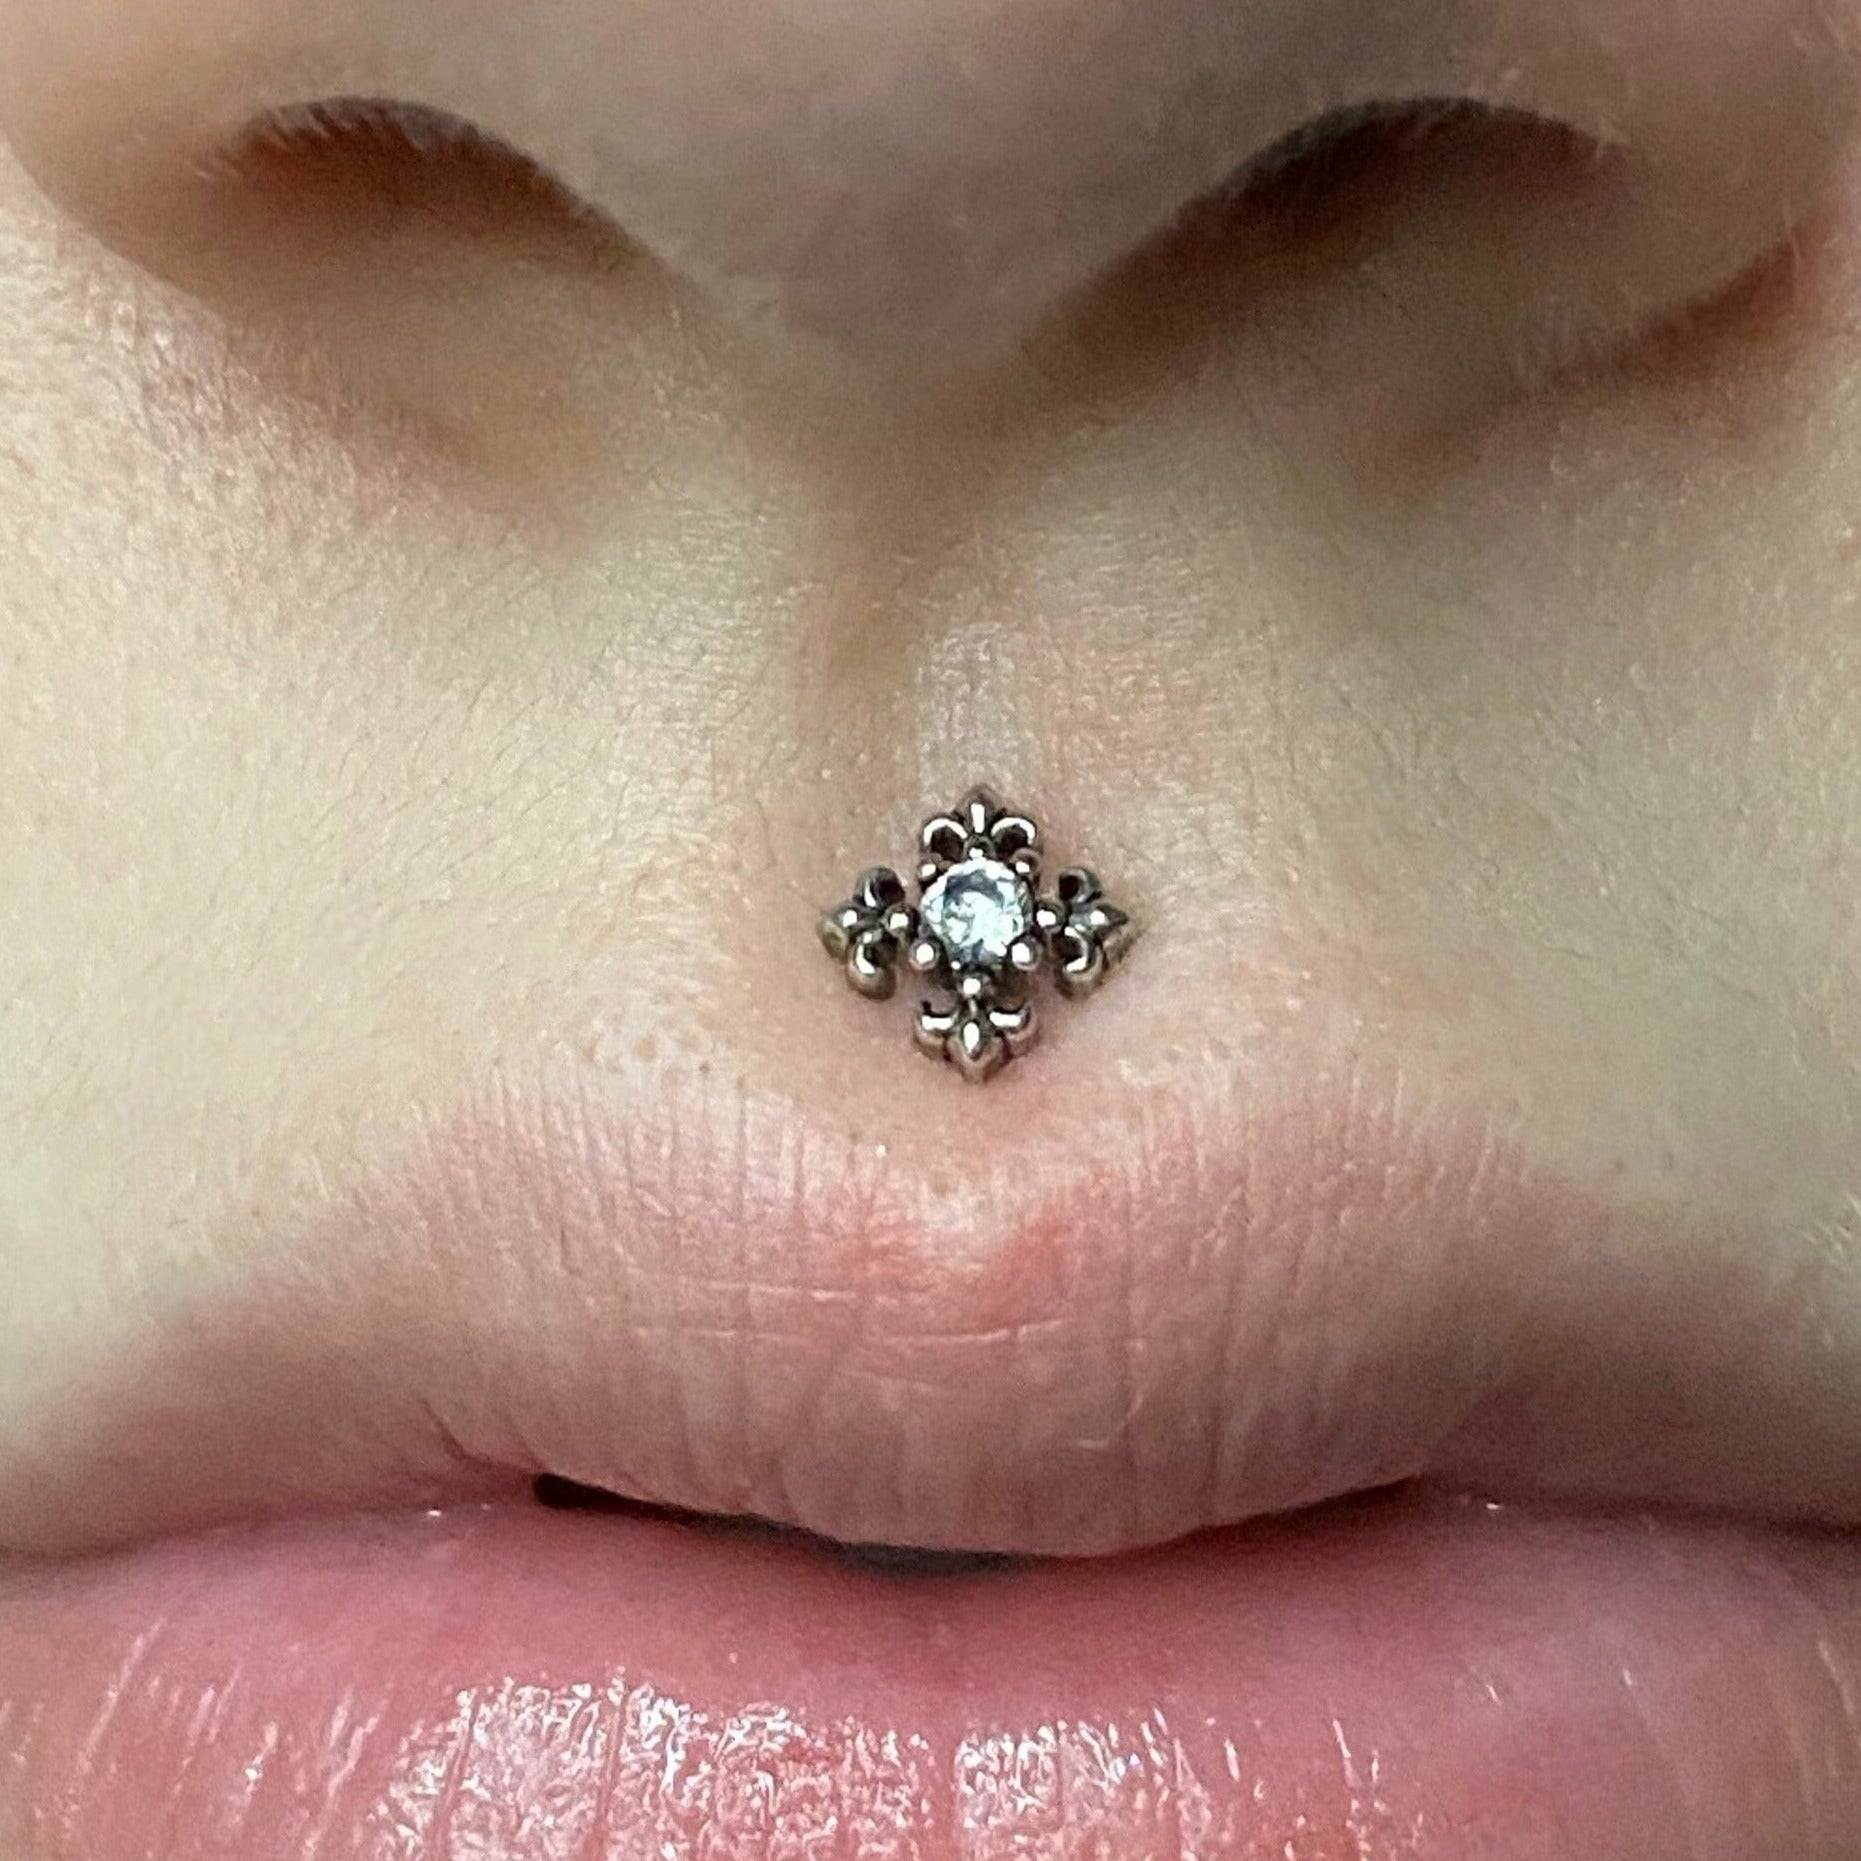 The Latest In Lip Piercings: Labrets, Medusas, And More